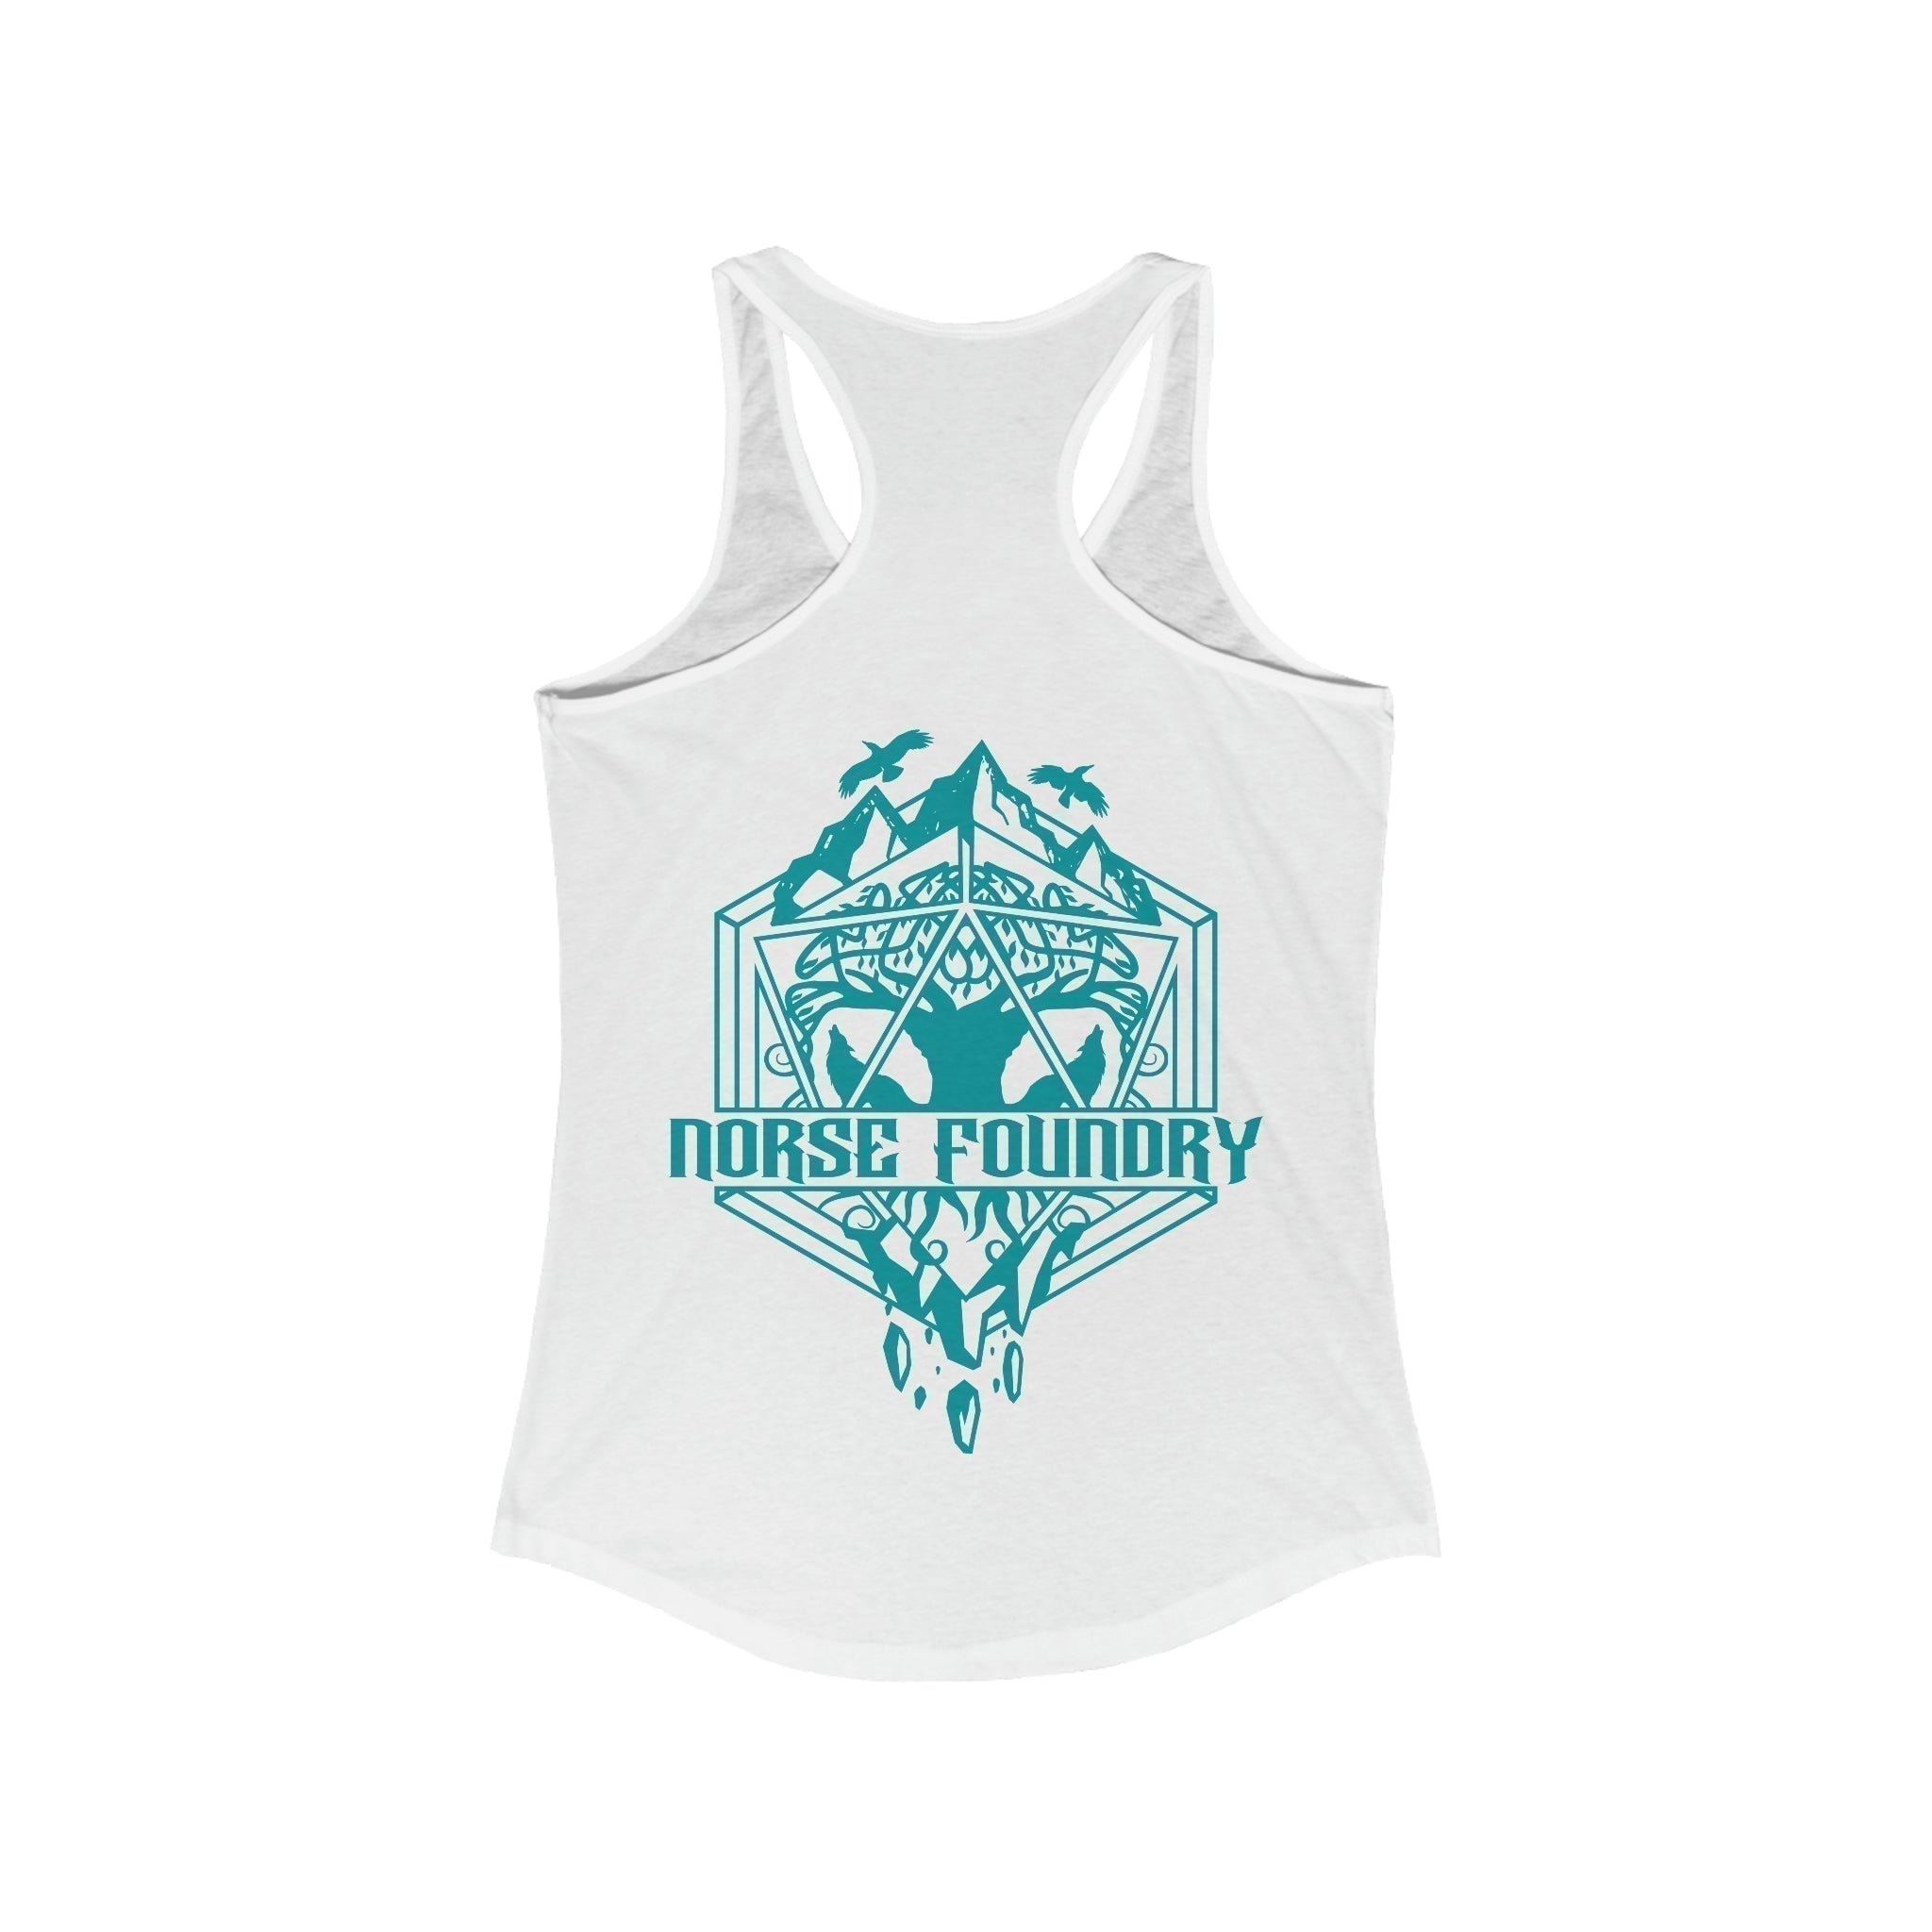 Roll for Adventure - Norse Foundry Women's Tank Top - 22847251986287207800